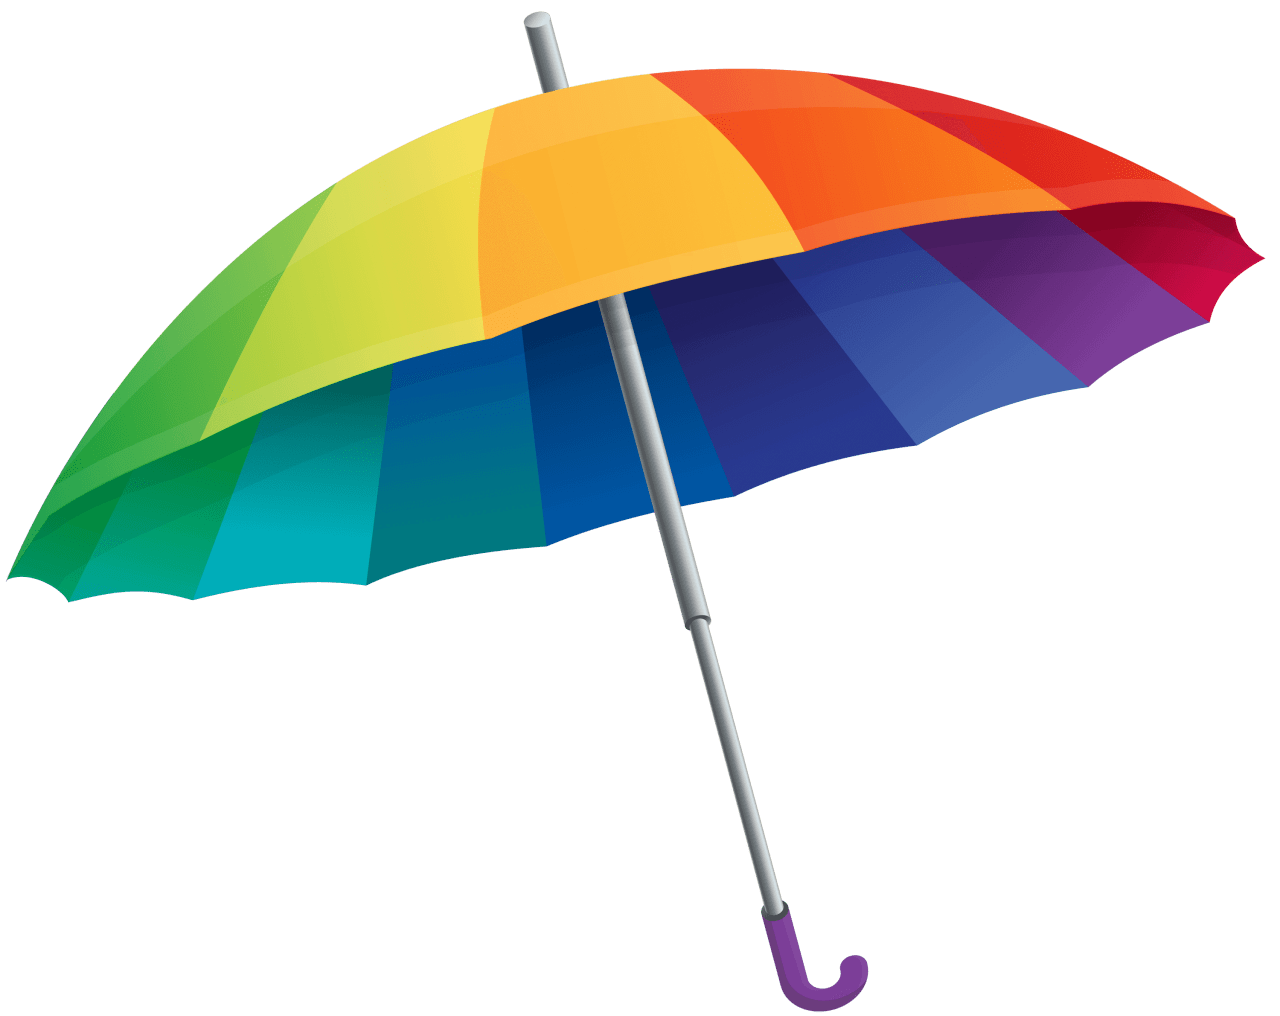 Umbrella Insurance - do you have this additional coverage